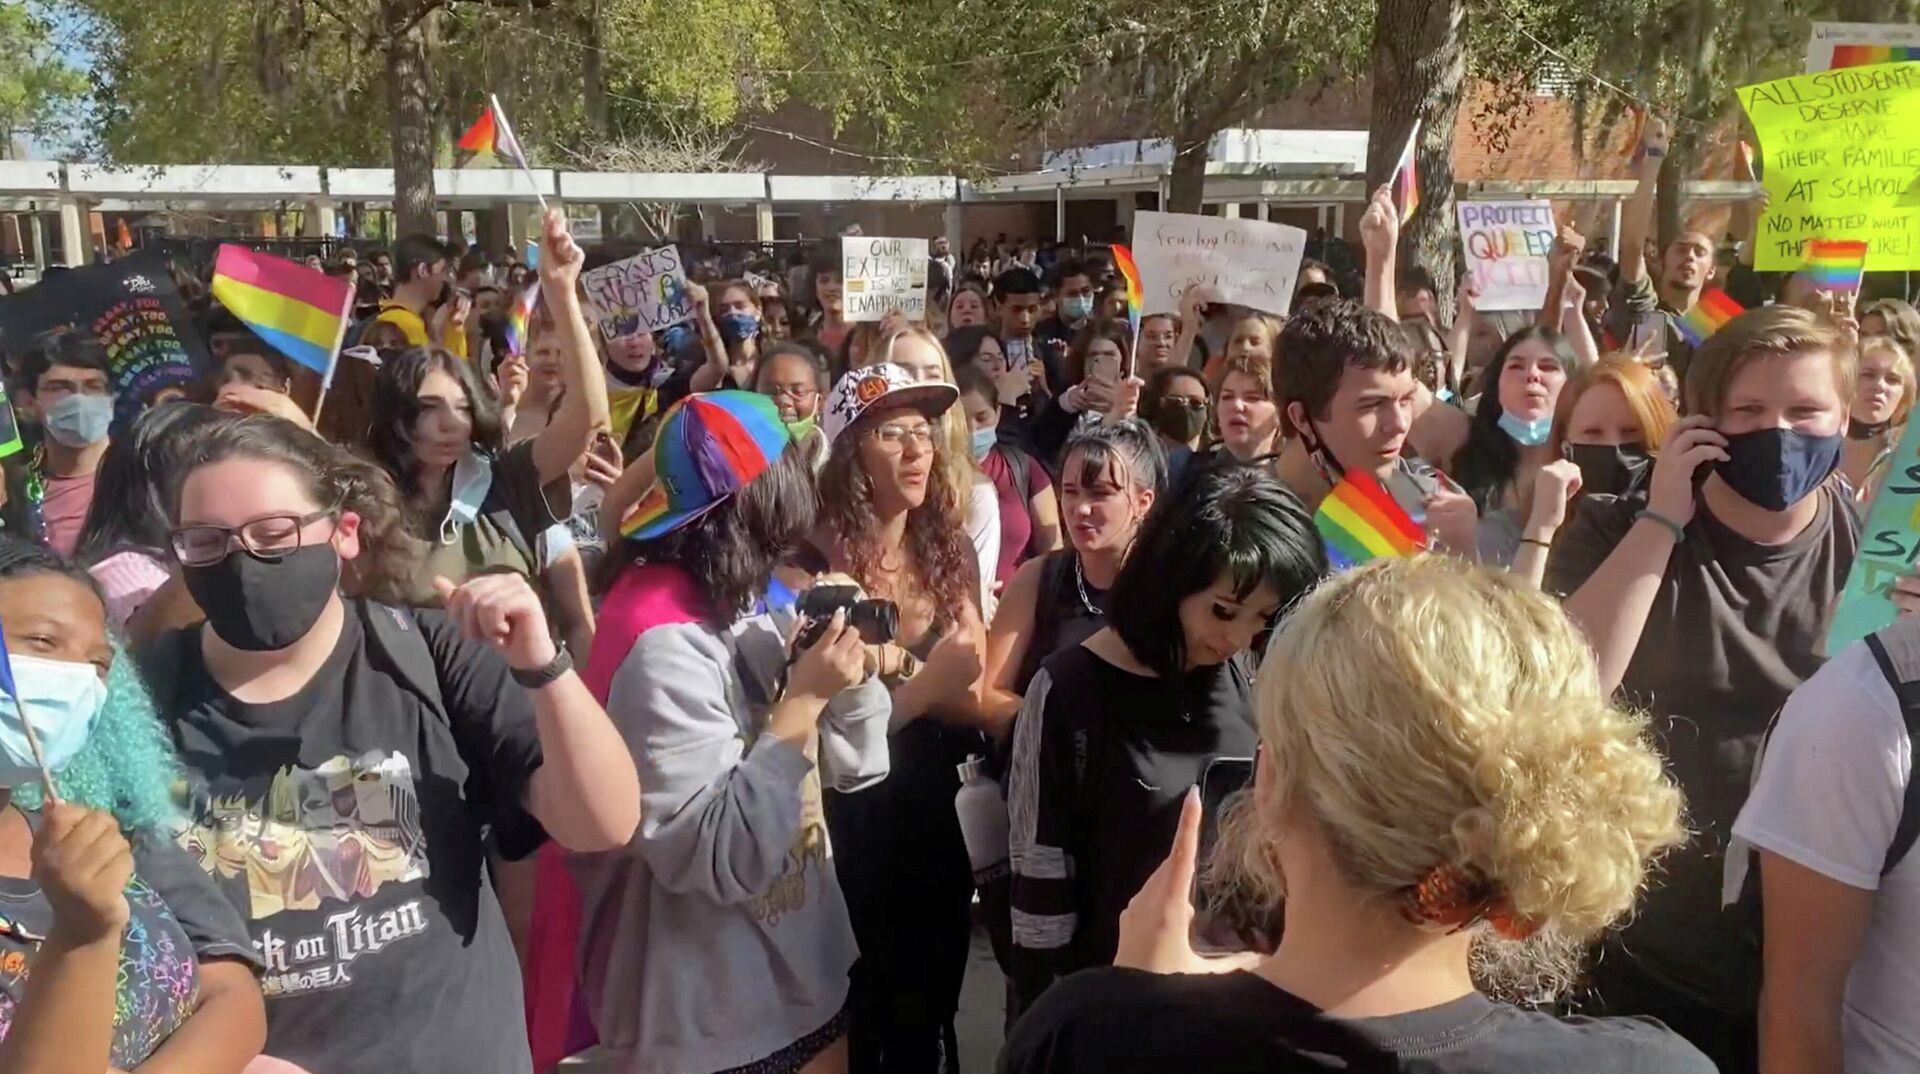 Students gather to protest after Florida's House of Representatives approved a Republican-backed bill that would prohibit classroom discussion of sexual orientation and gender identity, in Winter Park, Florida, U.S., March 7, 2022 in this still image obtained from a video posted on social media. - Sputnik International, 1920, 28.03.2022